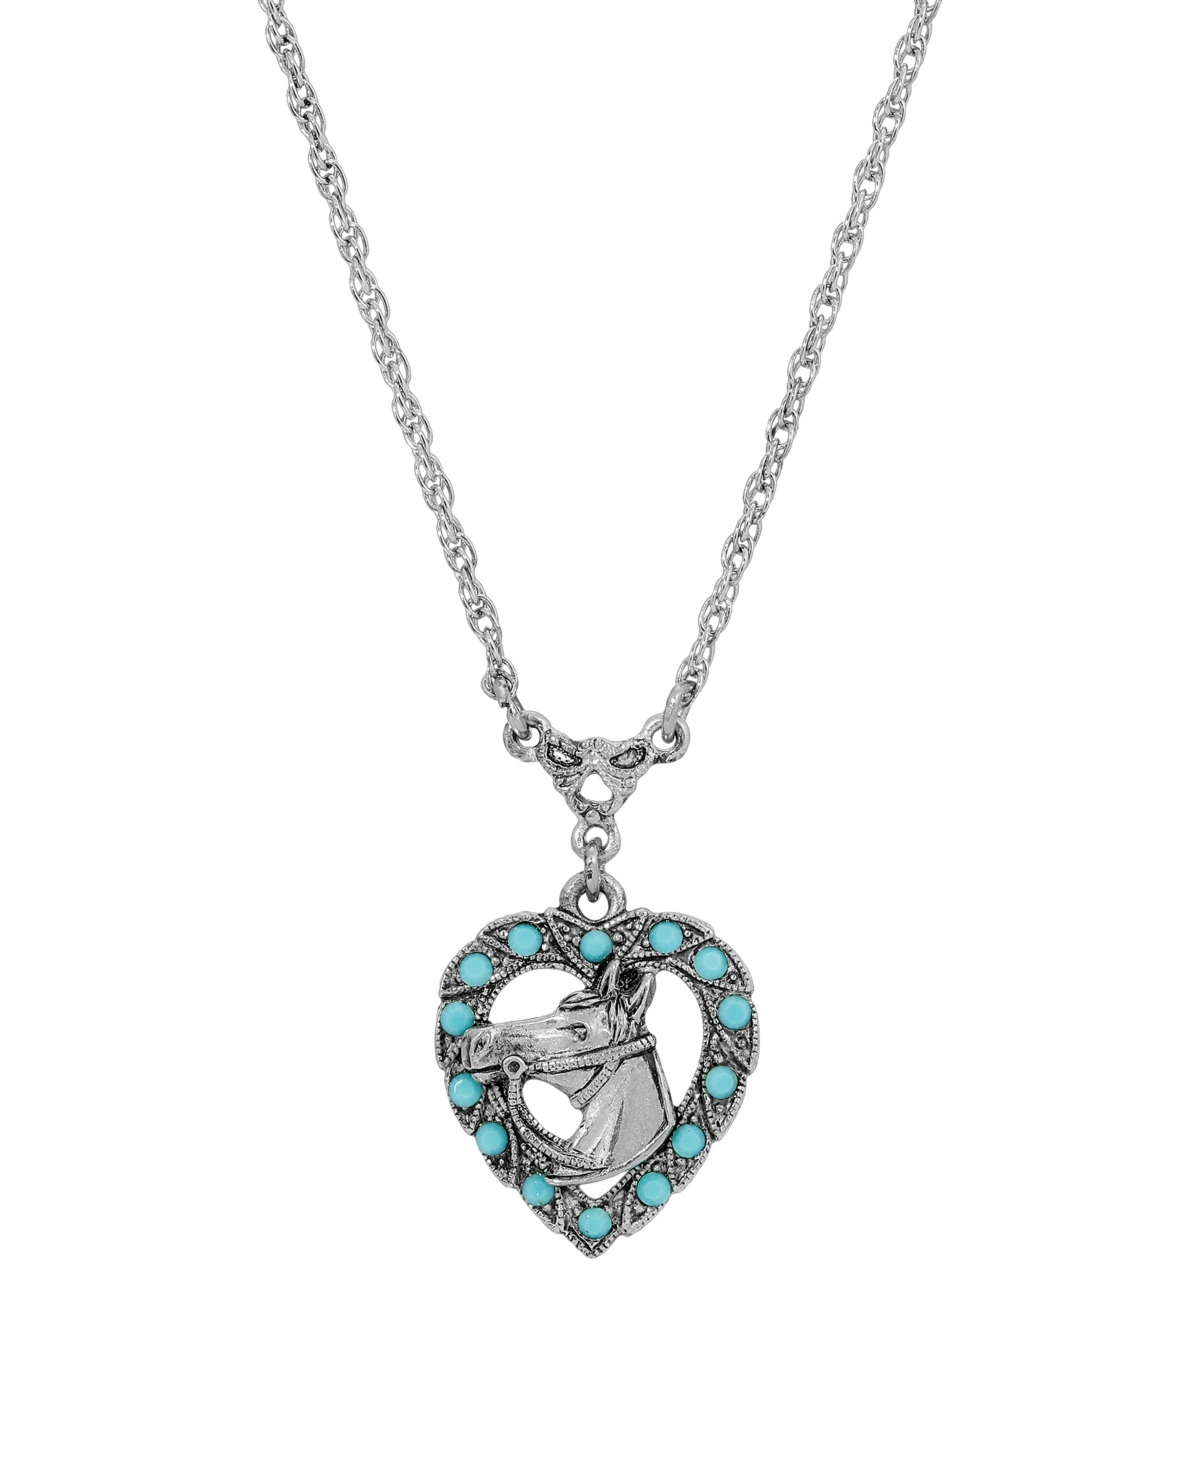 2028 Crystal Turquoise Horse Head Heart Shaped Necklace